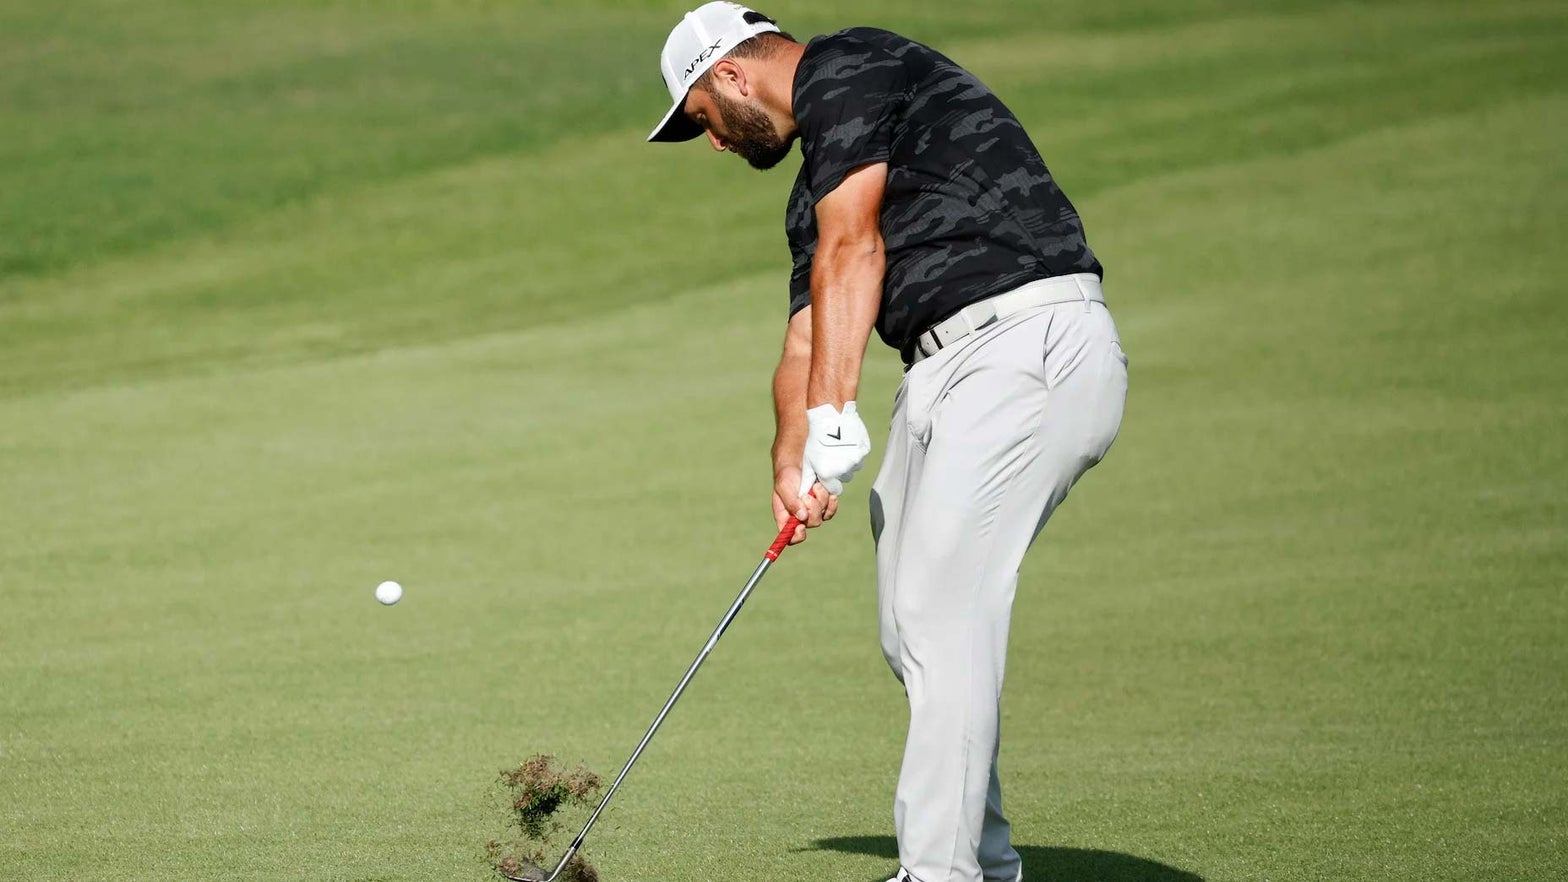 This is how high pro golfers hit all of their golf clubs